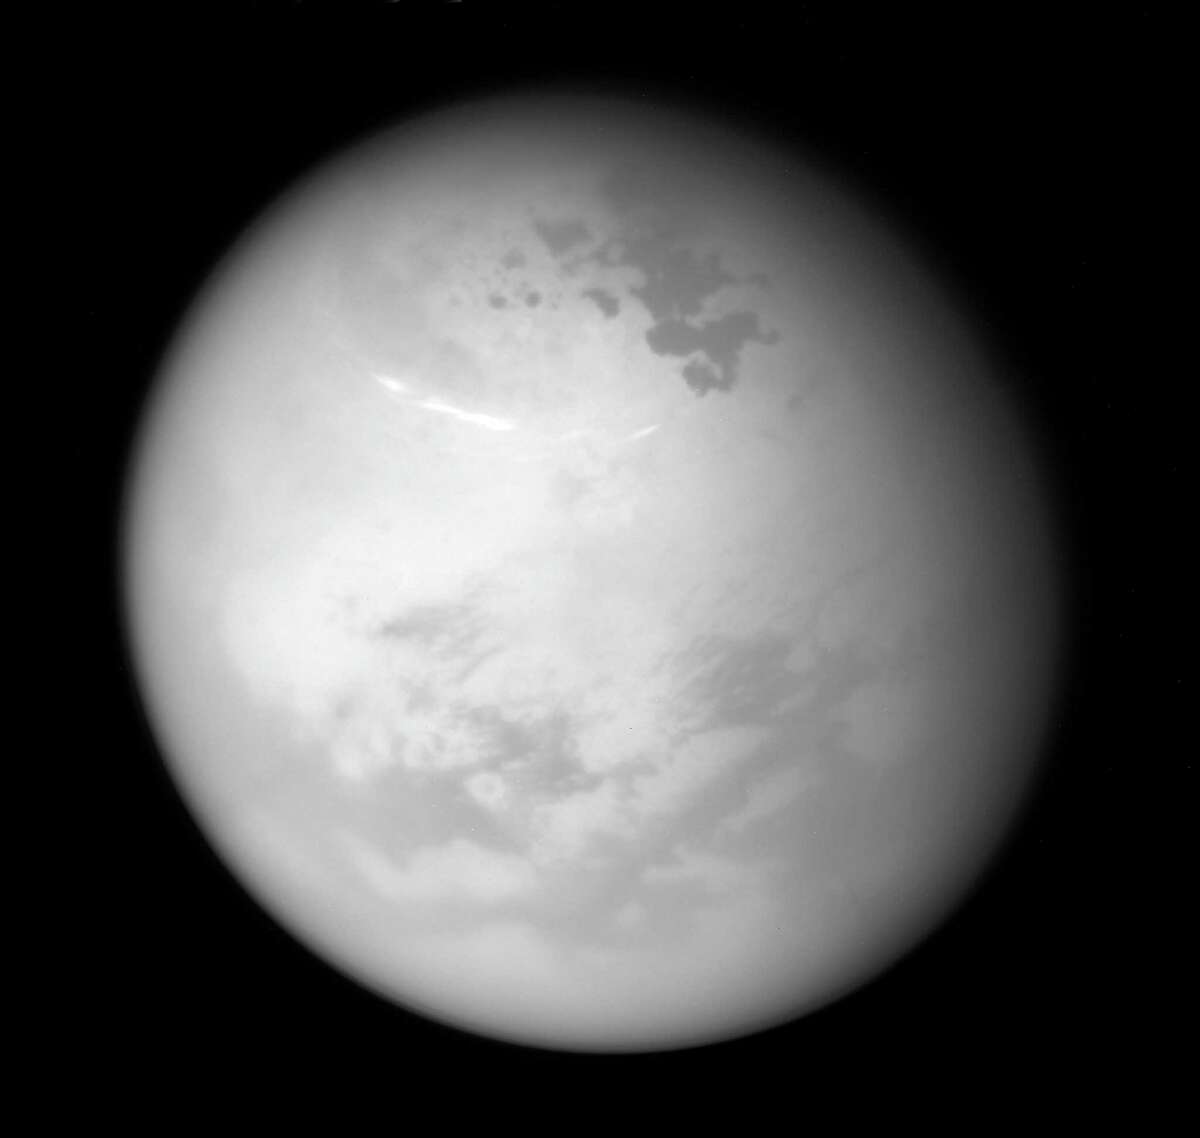 This June 9, 2017 image made available by NASA shows bright methane clouds drifting in the summer skies of Saturn's moon Titan, along with dark hydrocarbon lakes and seas clustered around the north pole, as seen from the Cassini spacecraft. (NASA/JPL-Caltech/Space Science Institute via AP)